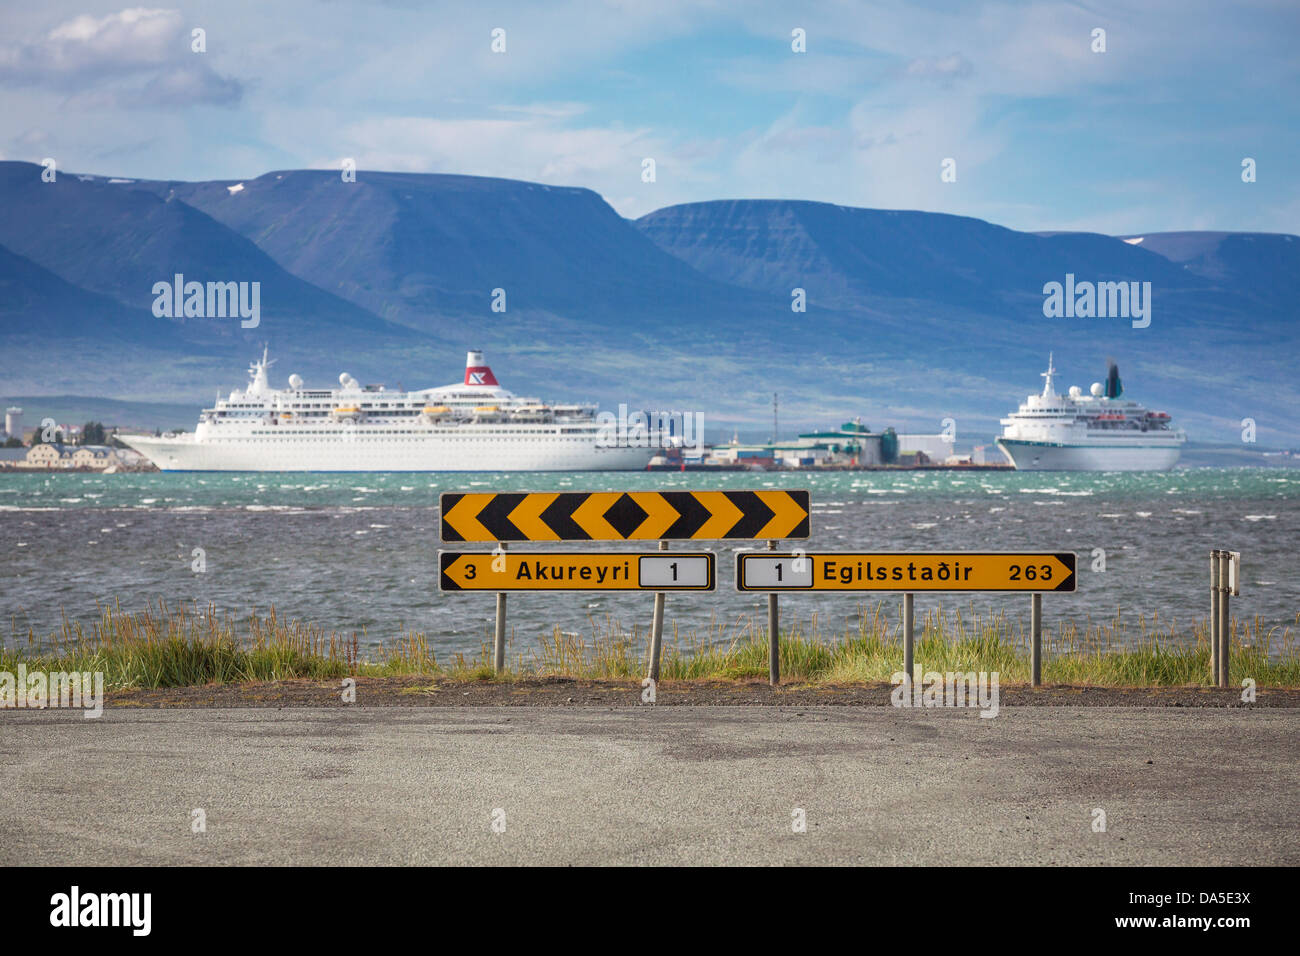 Road with traffic signs and cruise ships at port, Eyjafjordur, Akureyri, Iceland Stock Photo